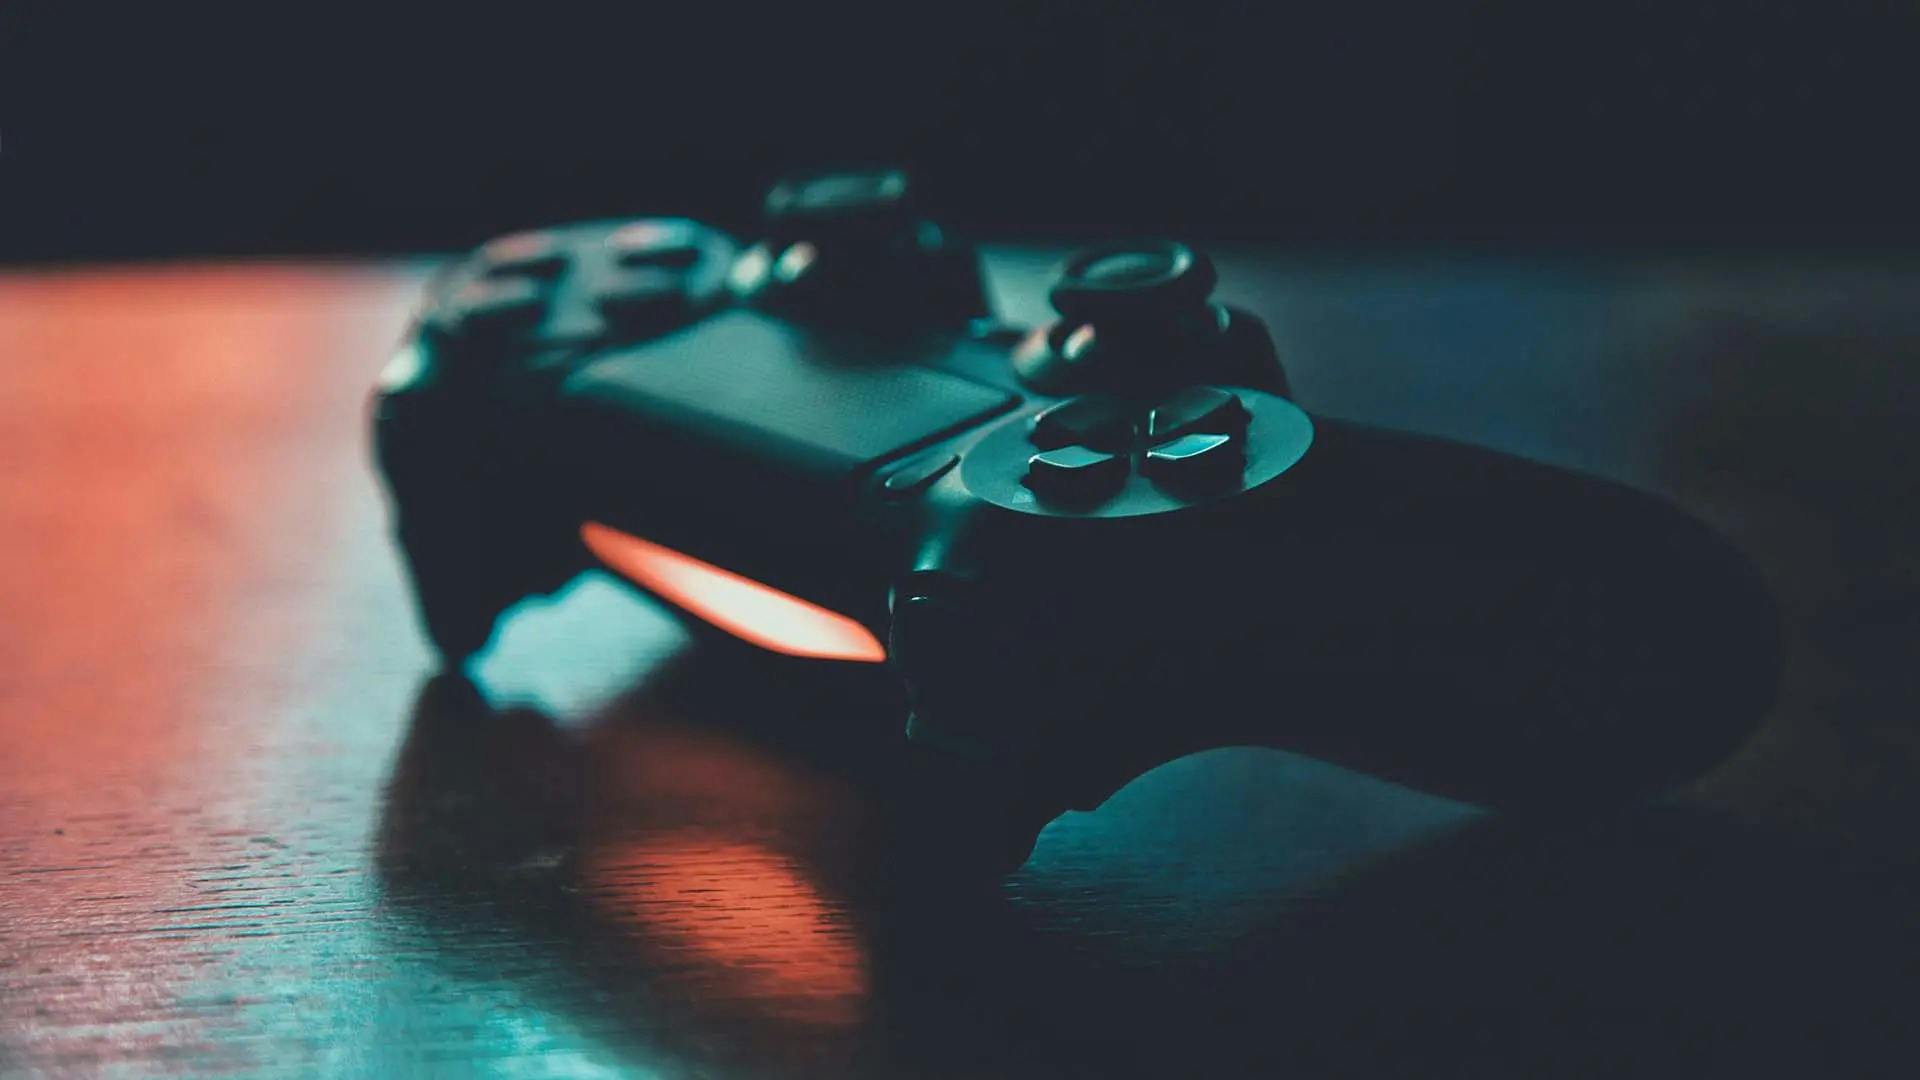 A gloomy photo of a PlayStation 4 controller with strong shadows and subtle orange and green lighting